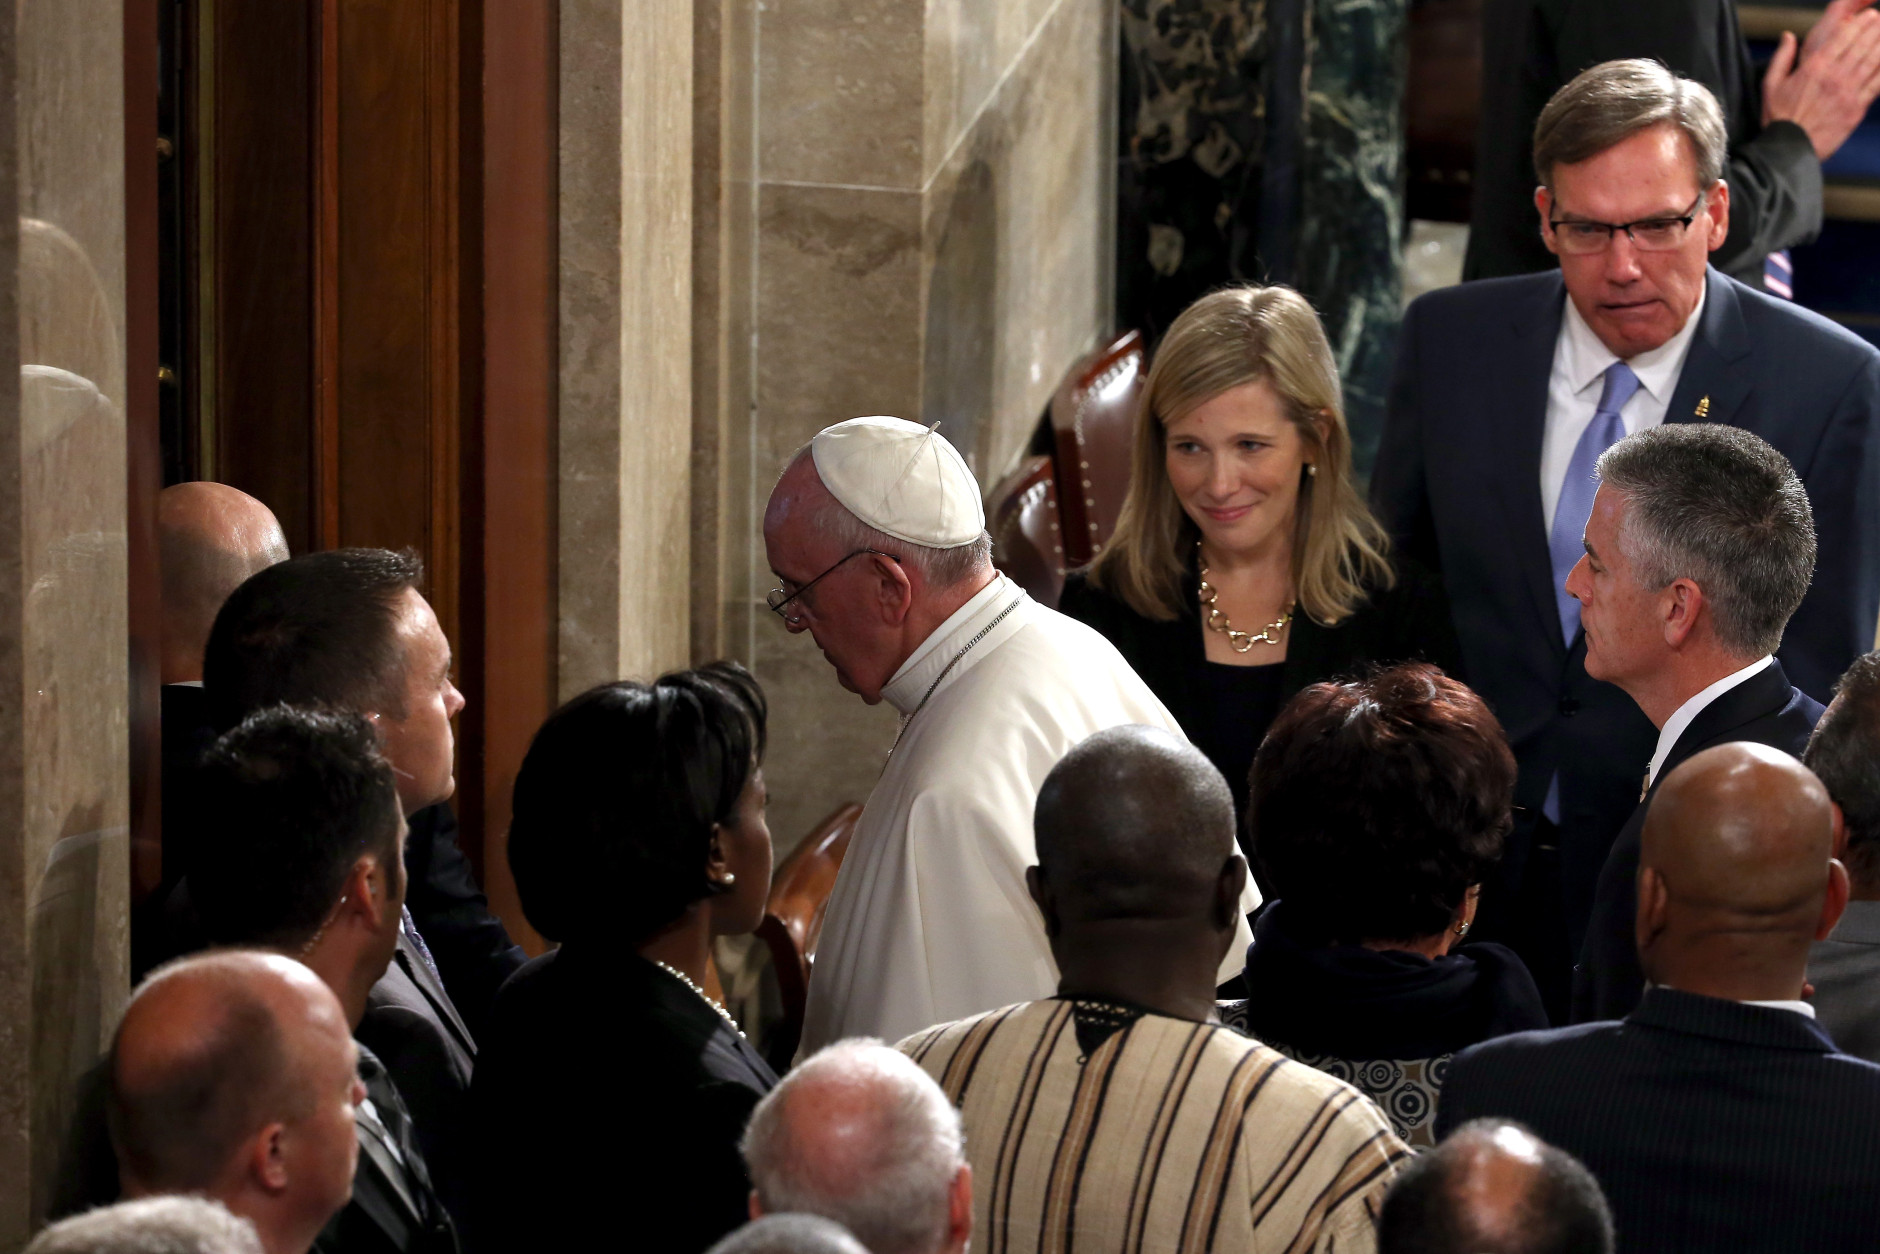 WASHINGTON, DC - SEPTEMBER 24:  Pope Francis exits the house after speaking at a joint meeting of the U.S. Congress in the House Chamber of the U.S. Capitol on September 24, 2015 in Washington, DC.  Pope Francis is the first pope to address a joint meeting of Congress and will finish his tour of Washington later today before traveling to New York City.  (Photo by Win McNamee/Getty Images)